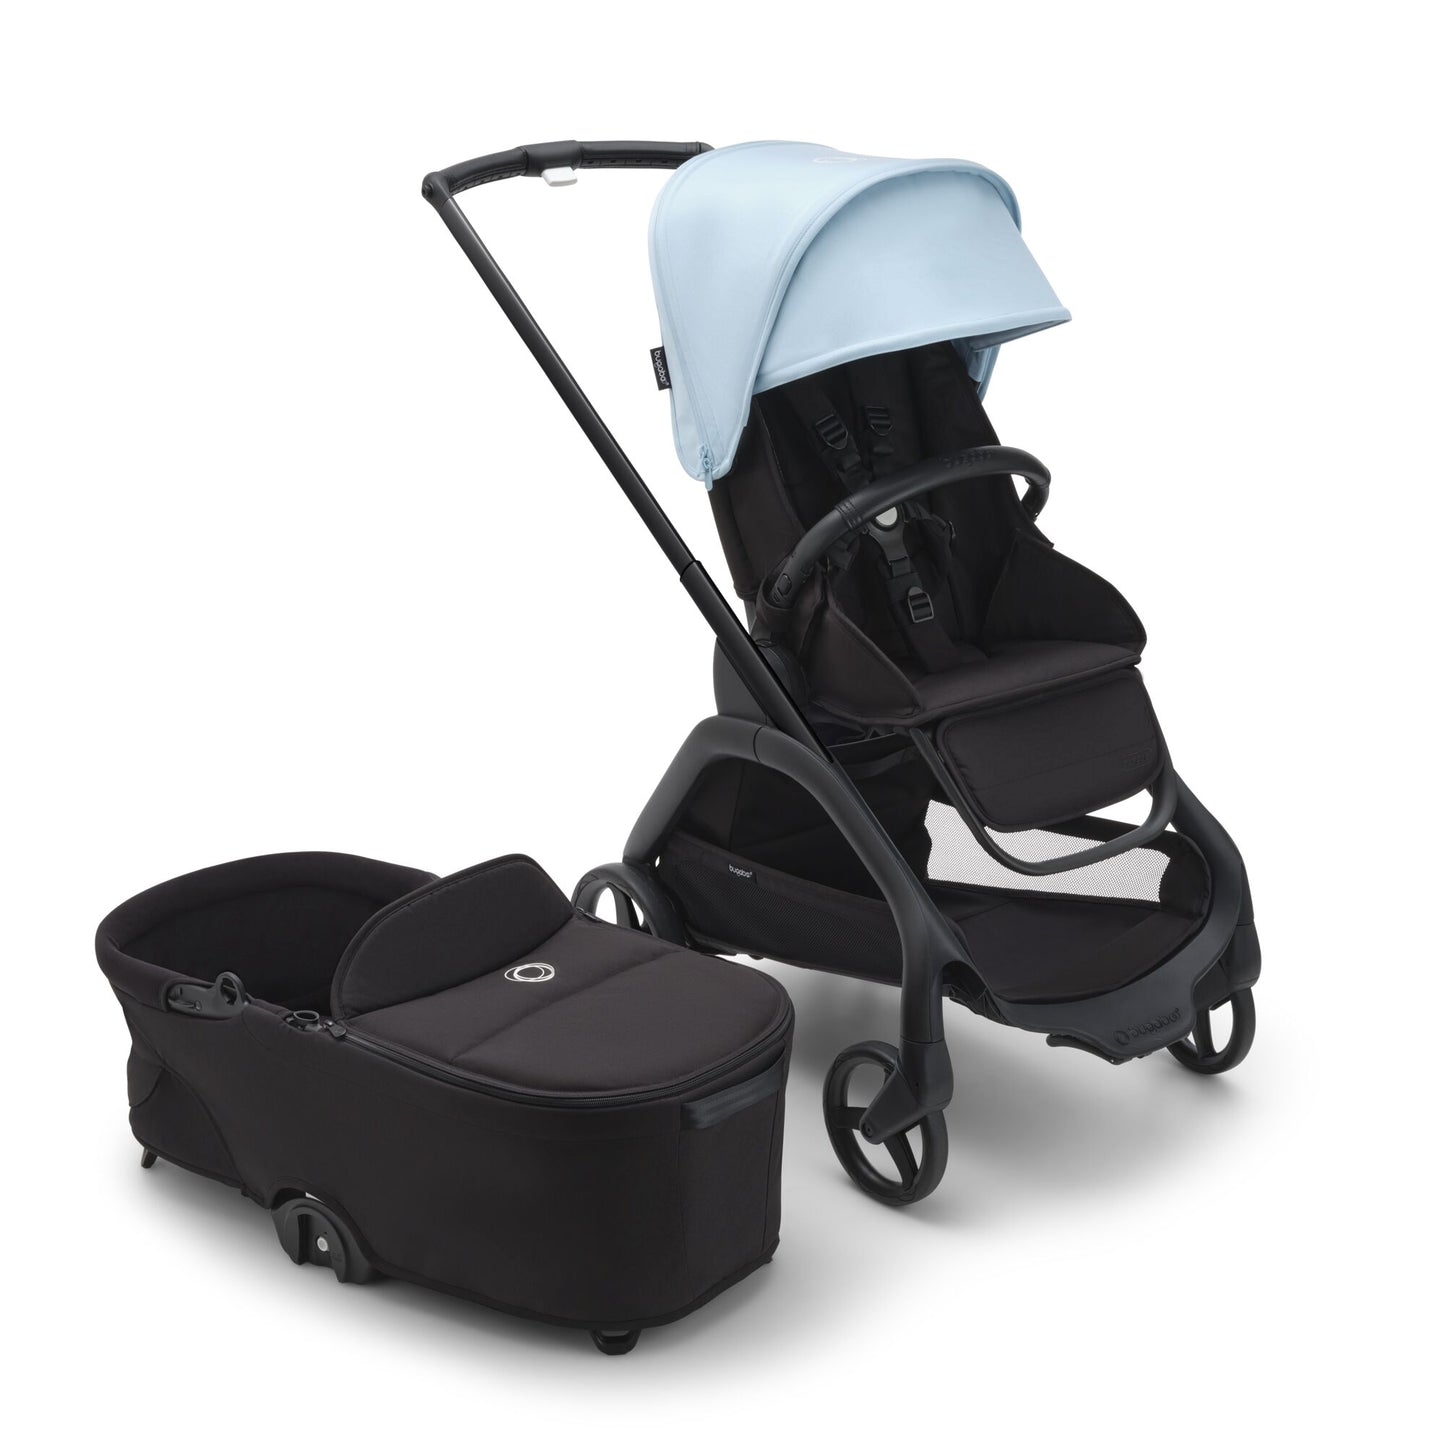 Bugaboo Dragonfly Complete Stroller with Seat and Bassinet - Black/Skyline Blue